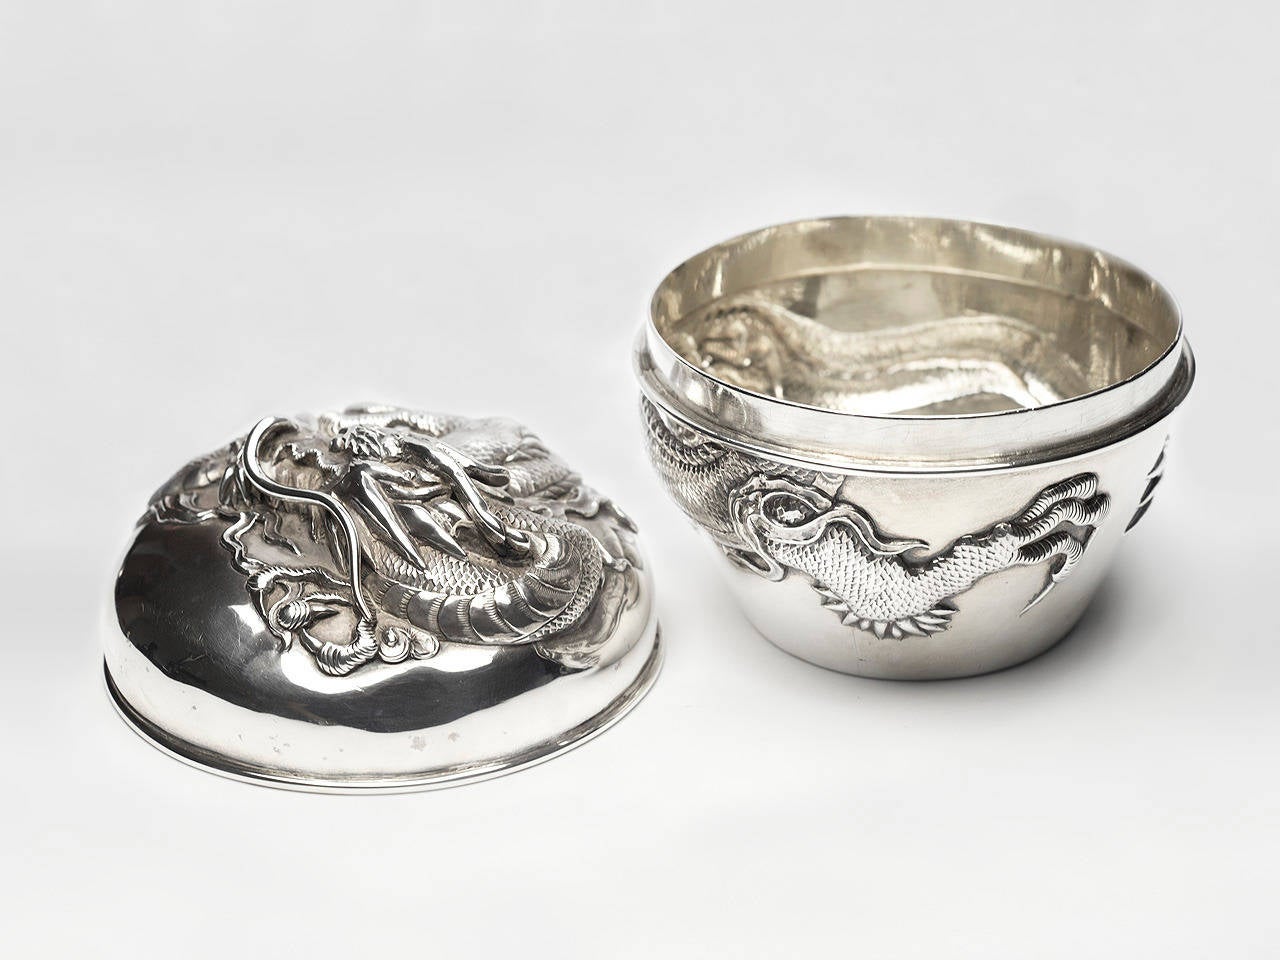 Antique Chines Export silver lidded box in a high relief dragon motif. Maker's mark for Luan Hing and export marks.